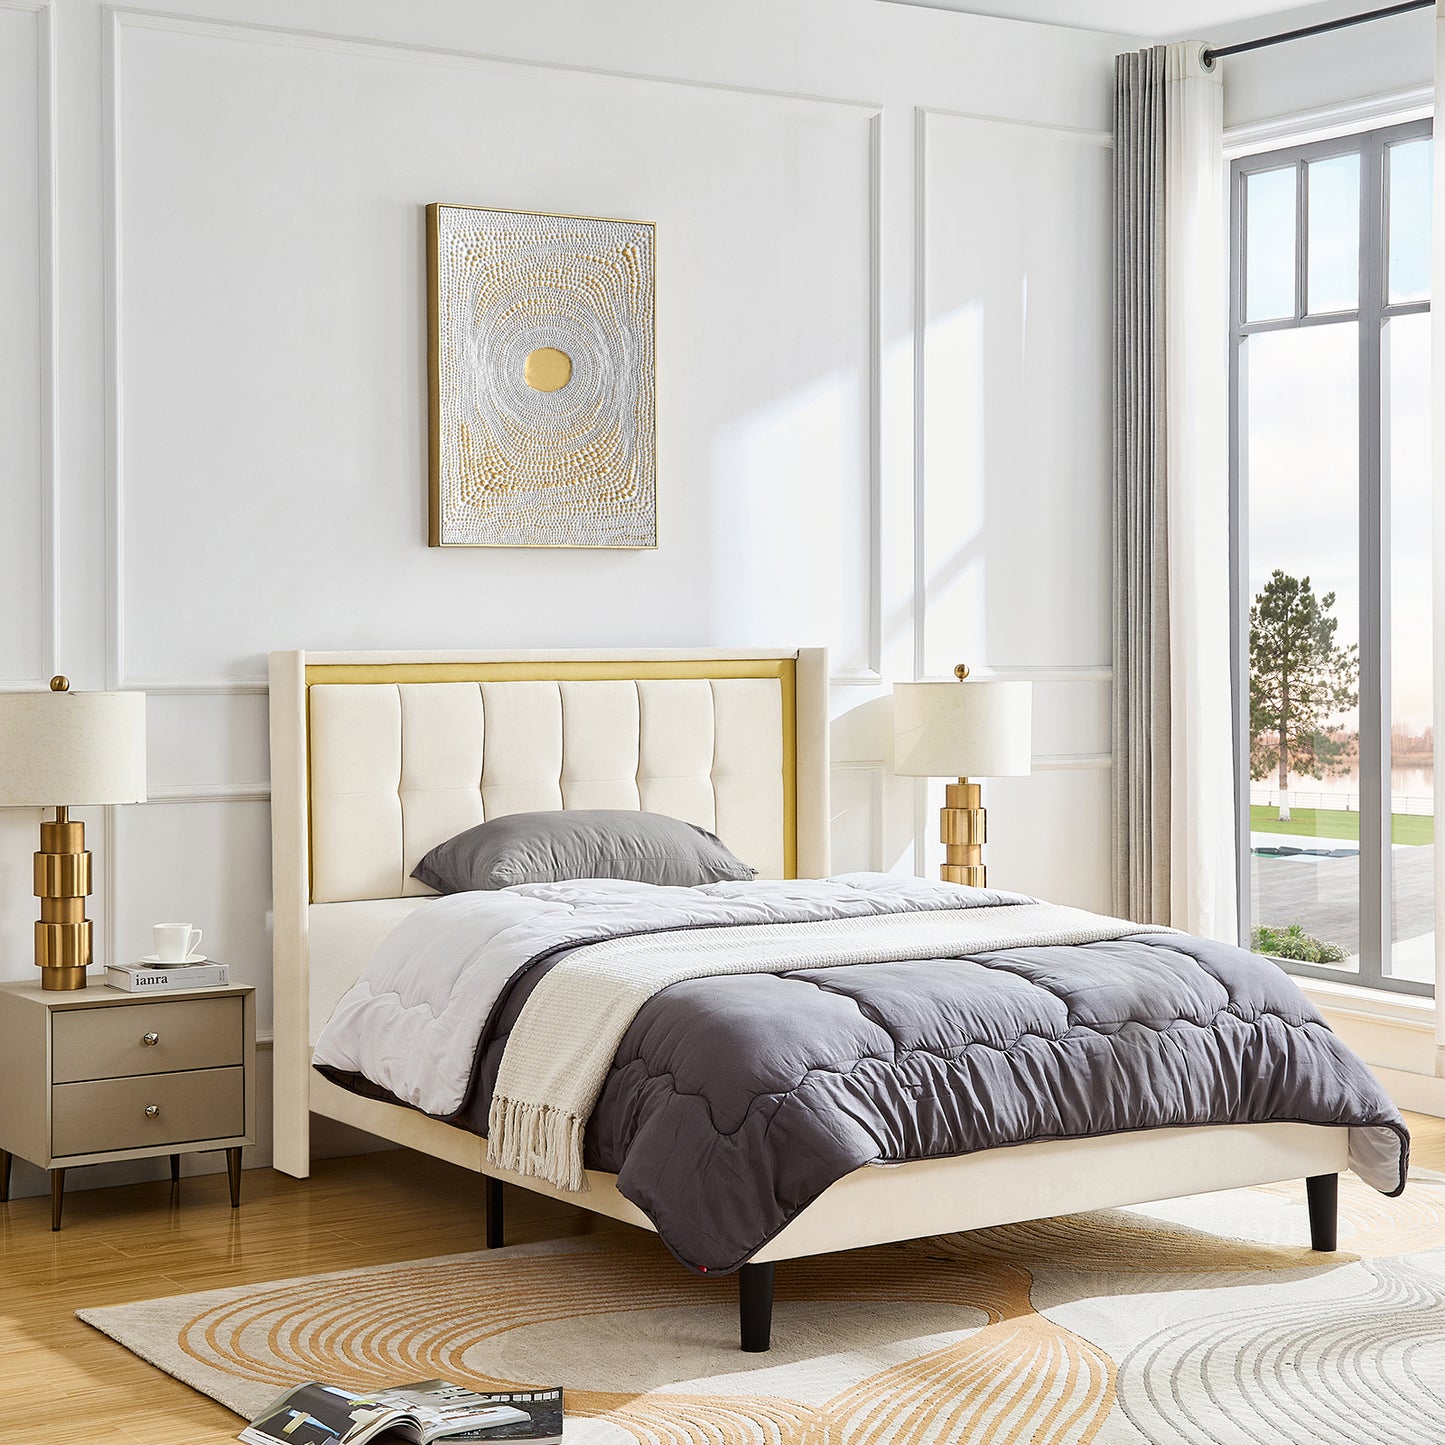 Queen Size Upholstered Platform bed with headboard, sturdy wooden slats, high load-bearing capacity, non-slip and noiseless, no springs, easy to assemble, beige